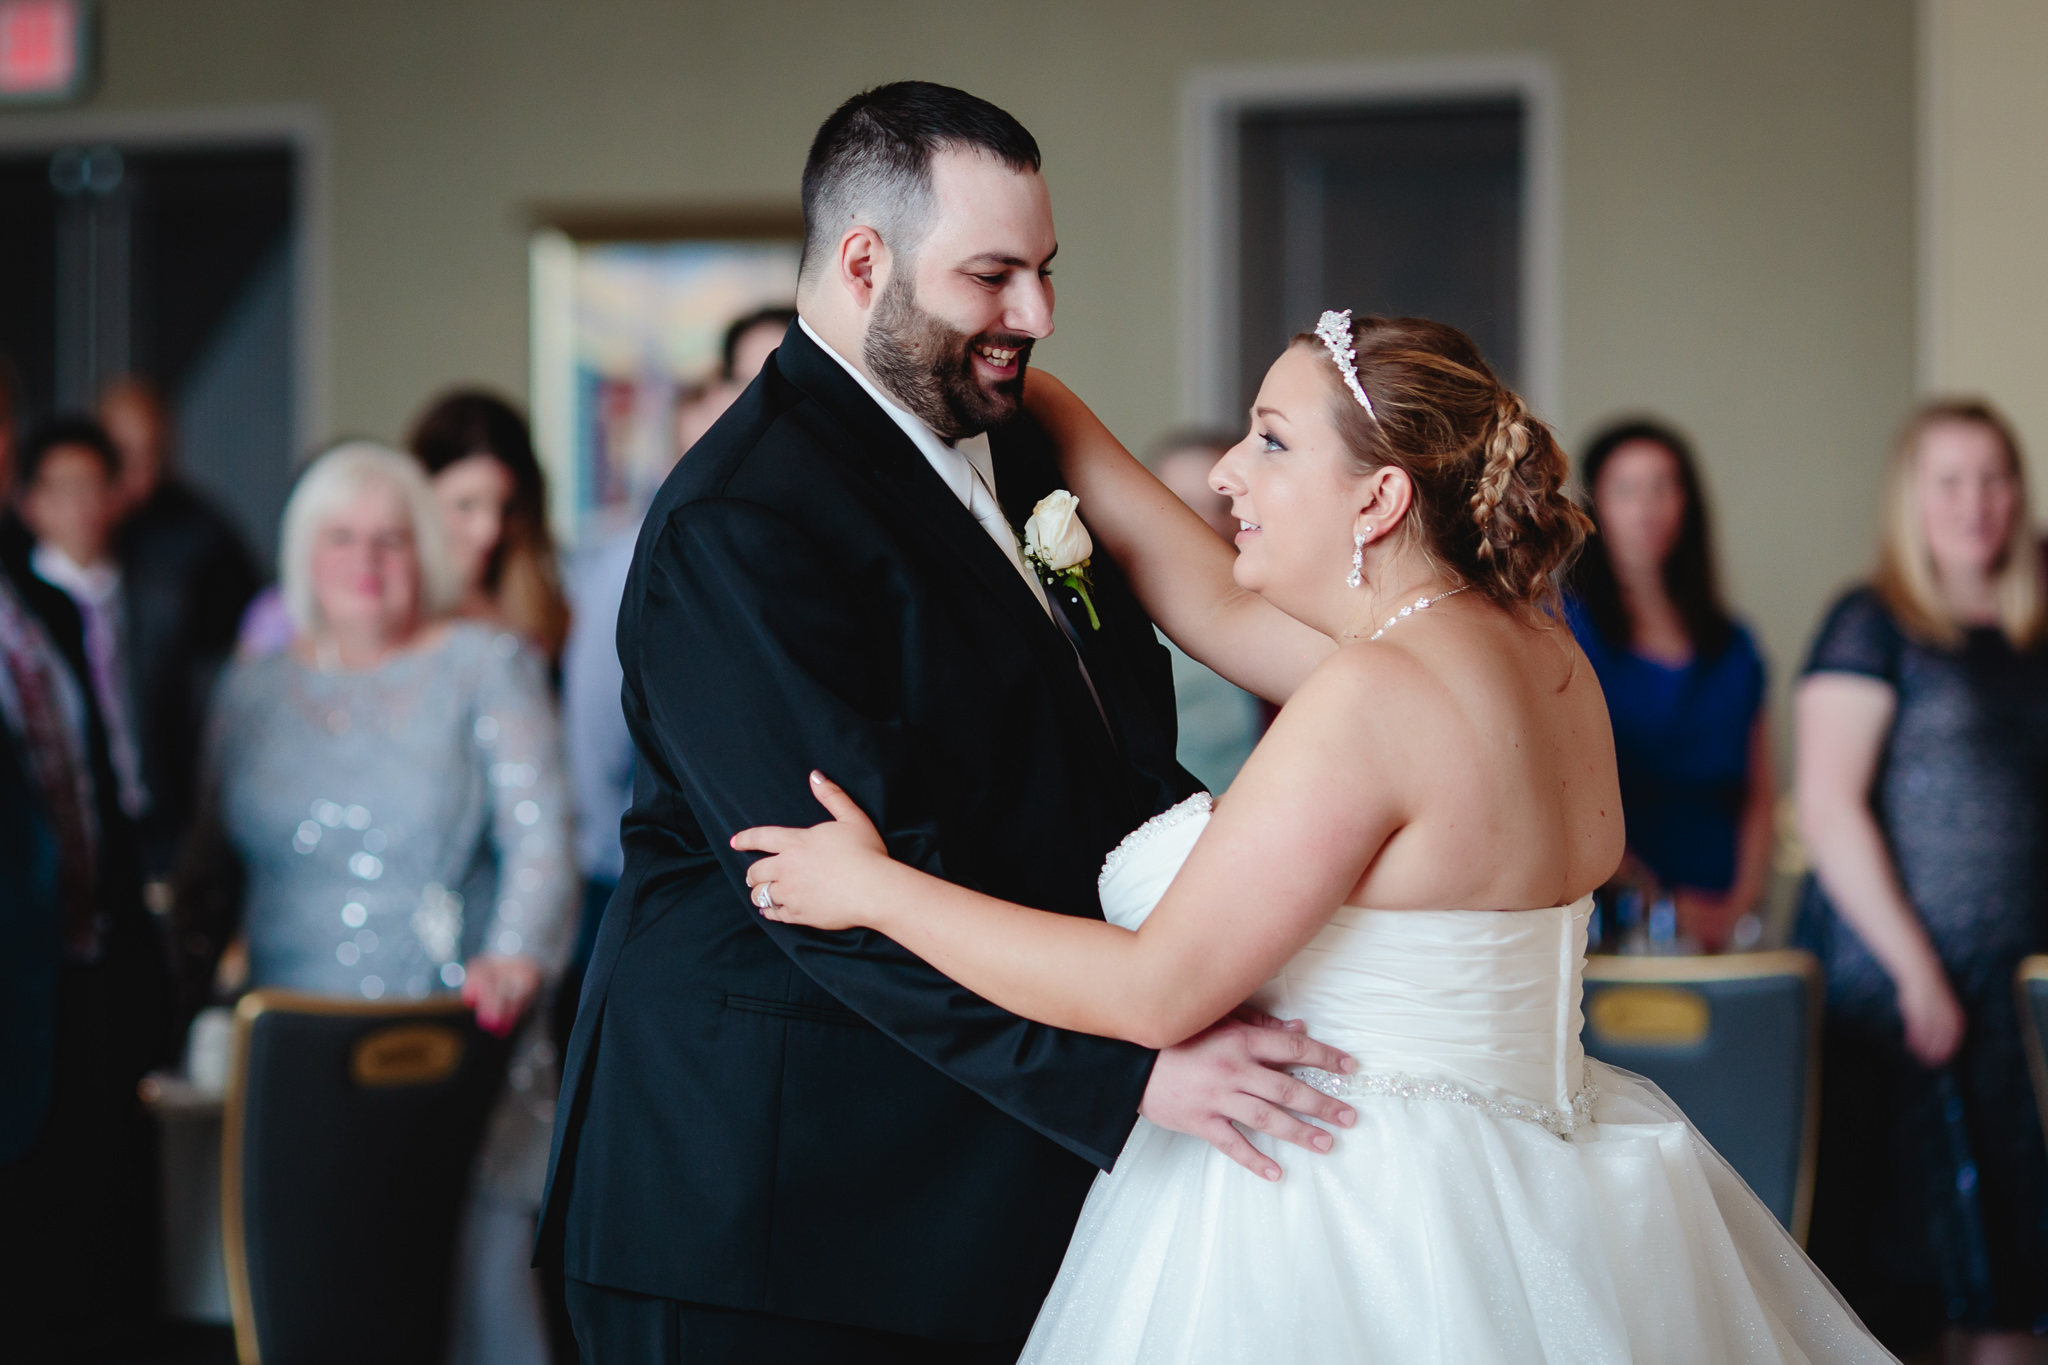 Newlyweds' first dance at their Duquesne University wedding